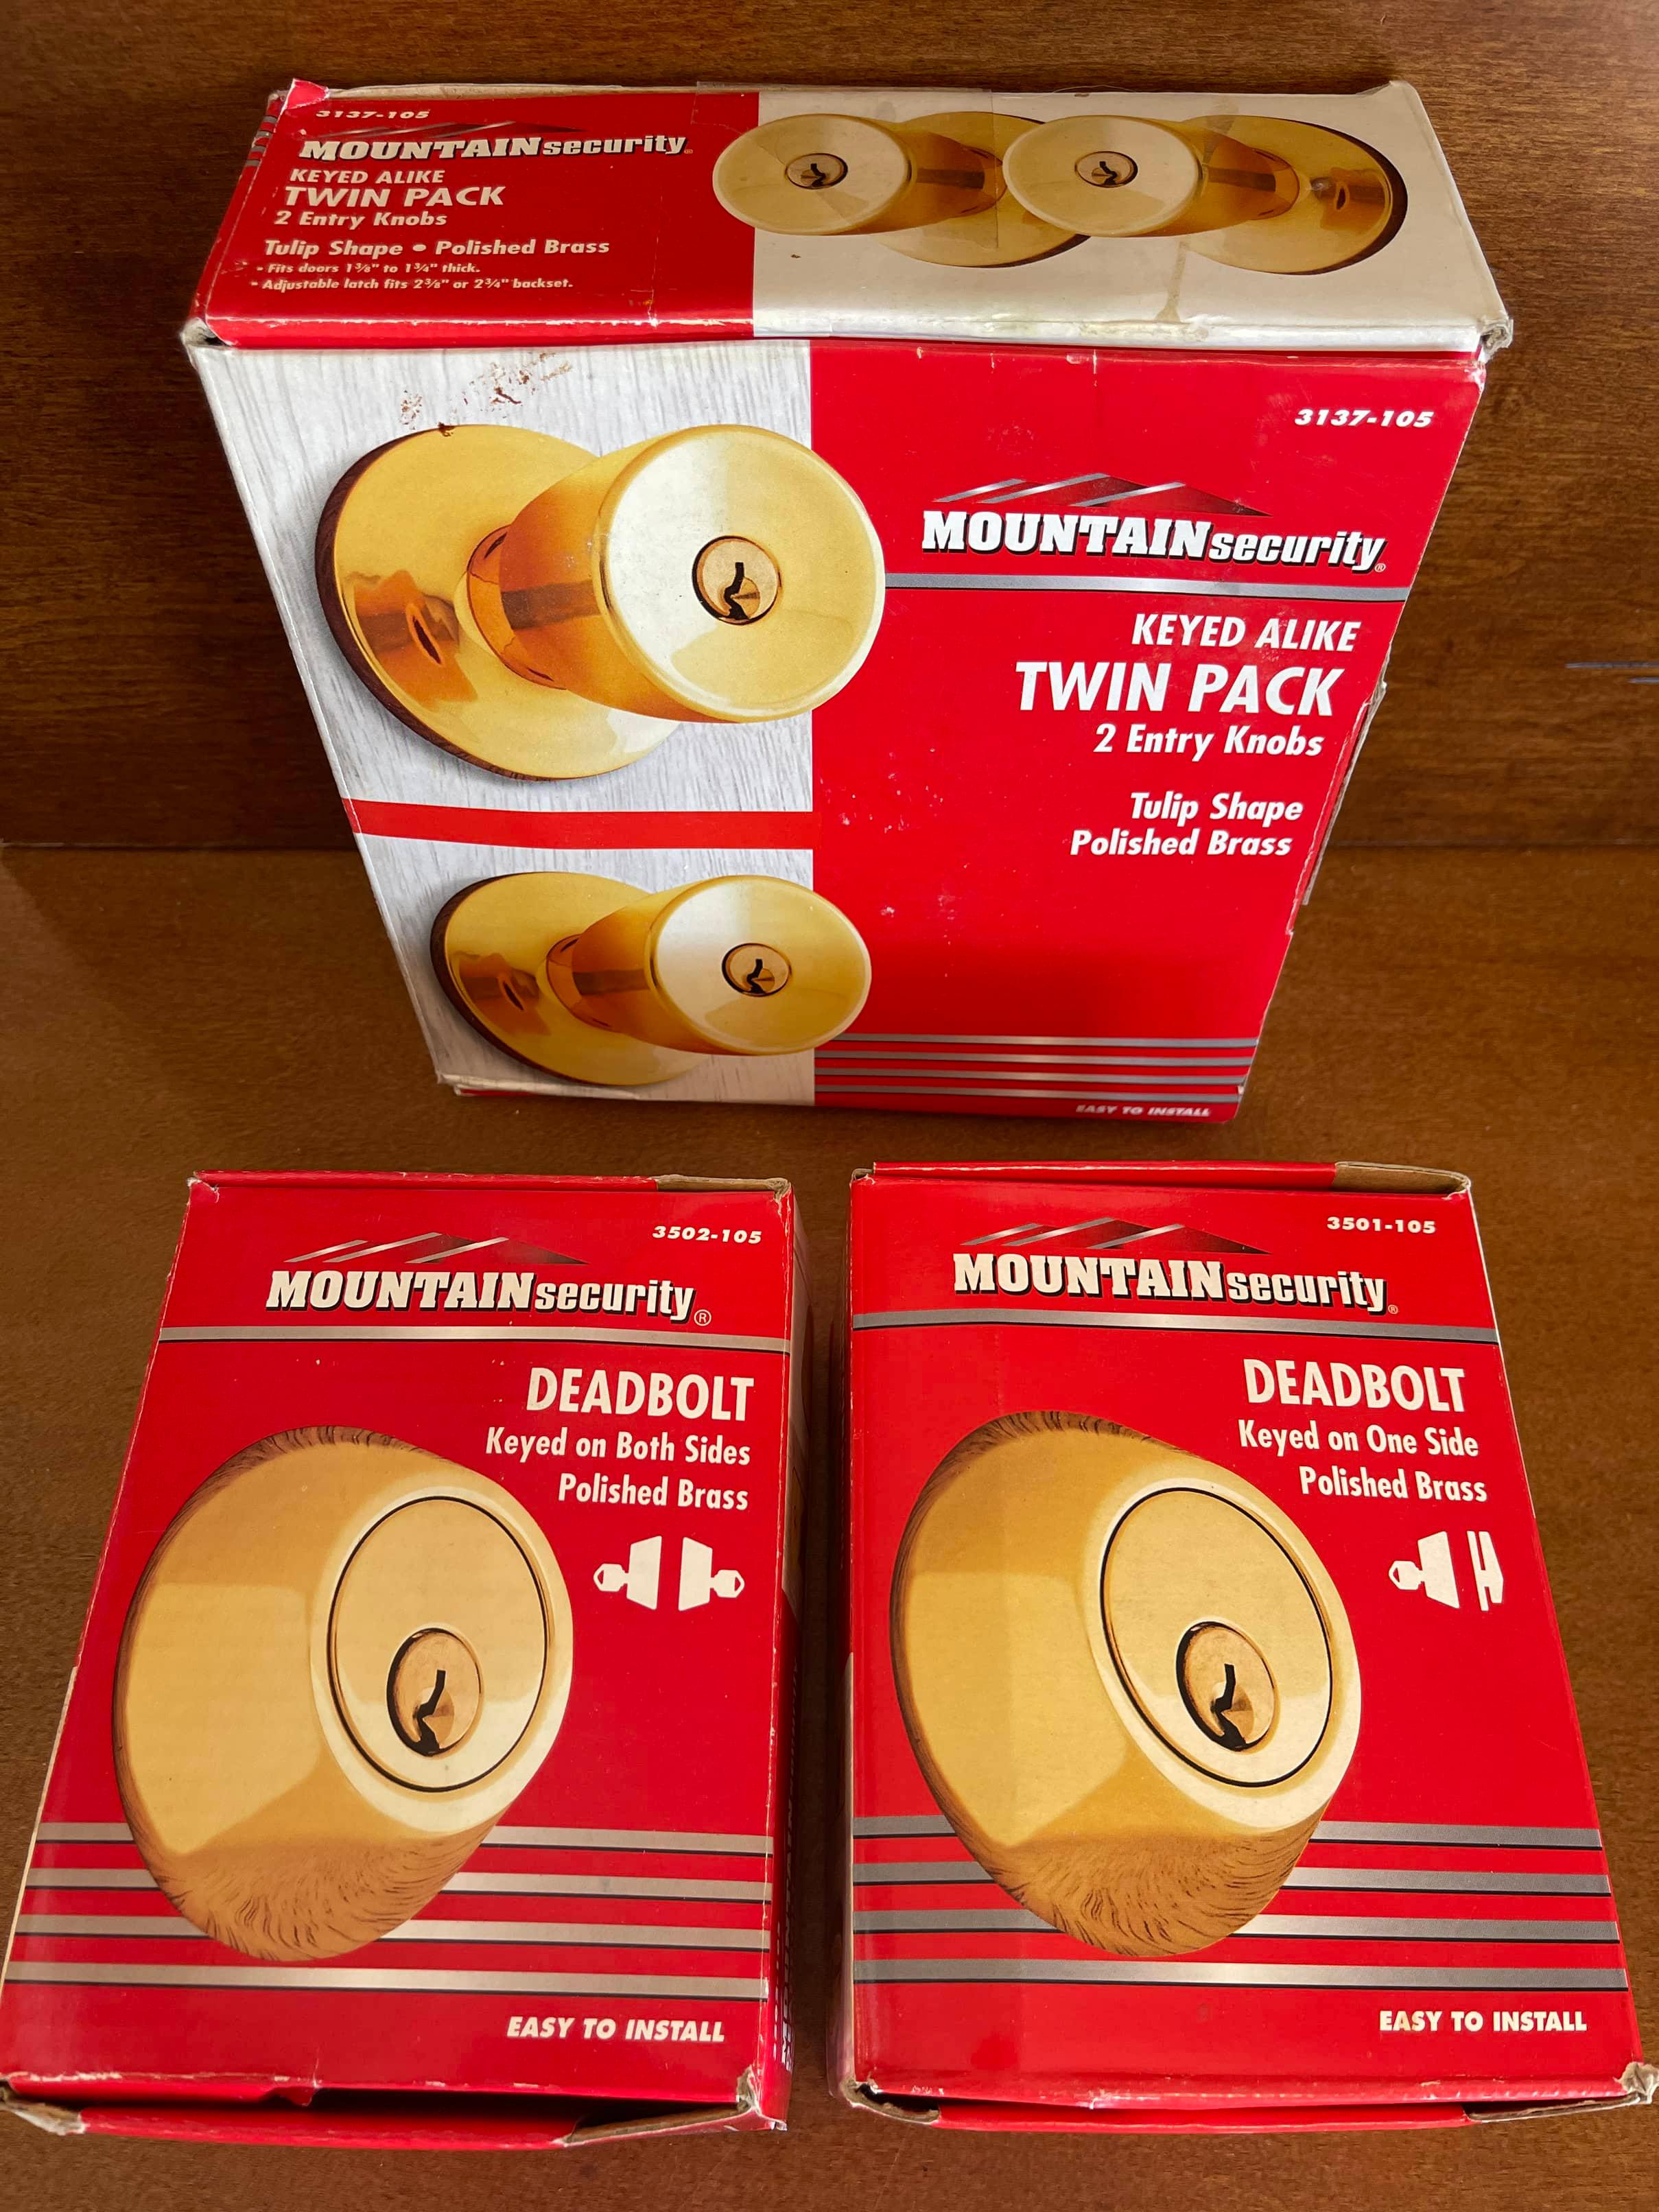 3 Boxes 2 Mountain Security Deadbolts Keyed on 1 Side & Twin Pack 2 Entry Knobs Tulip Shape Polished